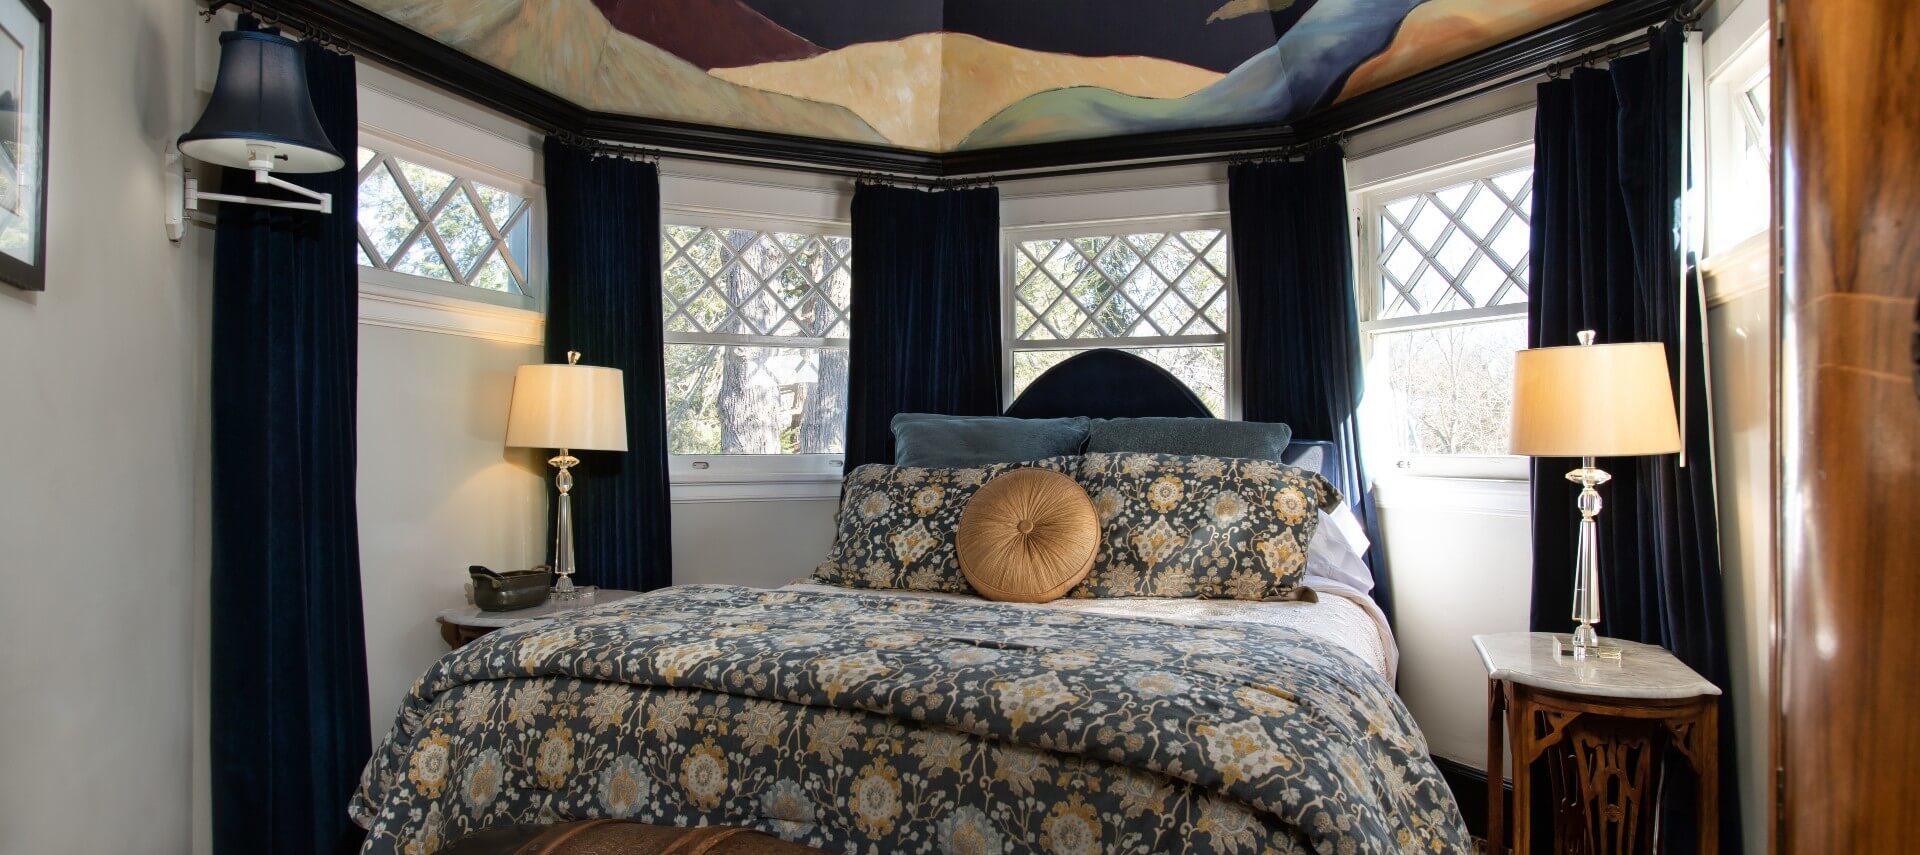 Bedroom with queen bed set within a bay window and a Gaugin-inspired nighttime sky mural overhead